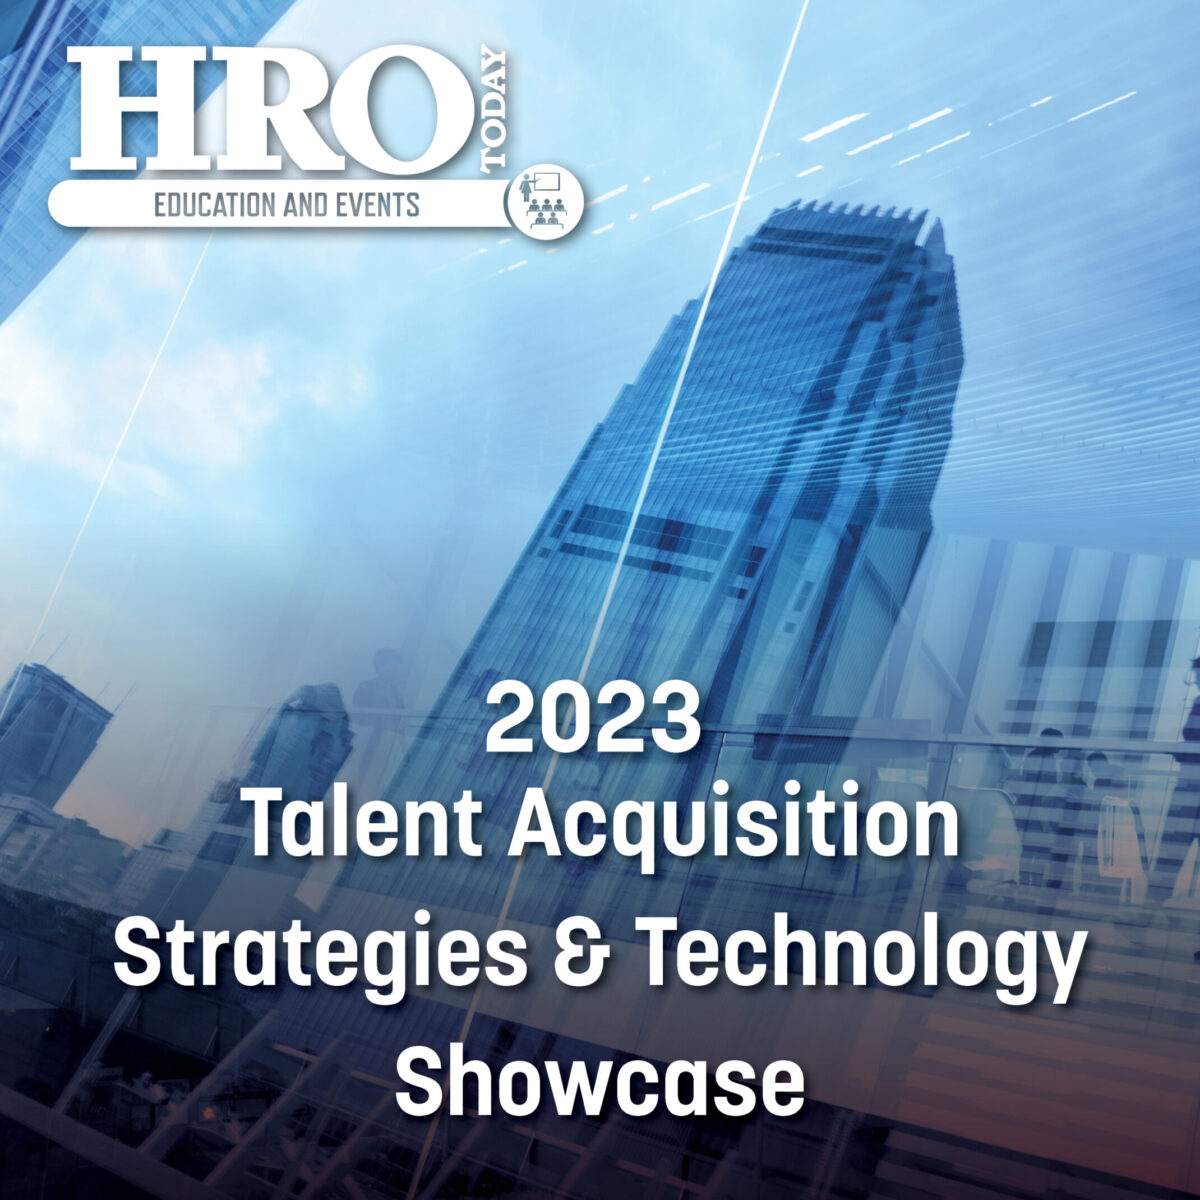 Talent Acquisition Showcase Featured Image 2023 2 Scaled 